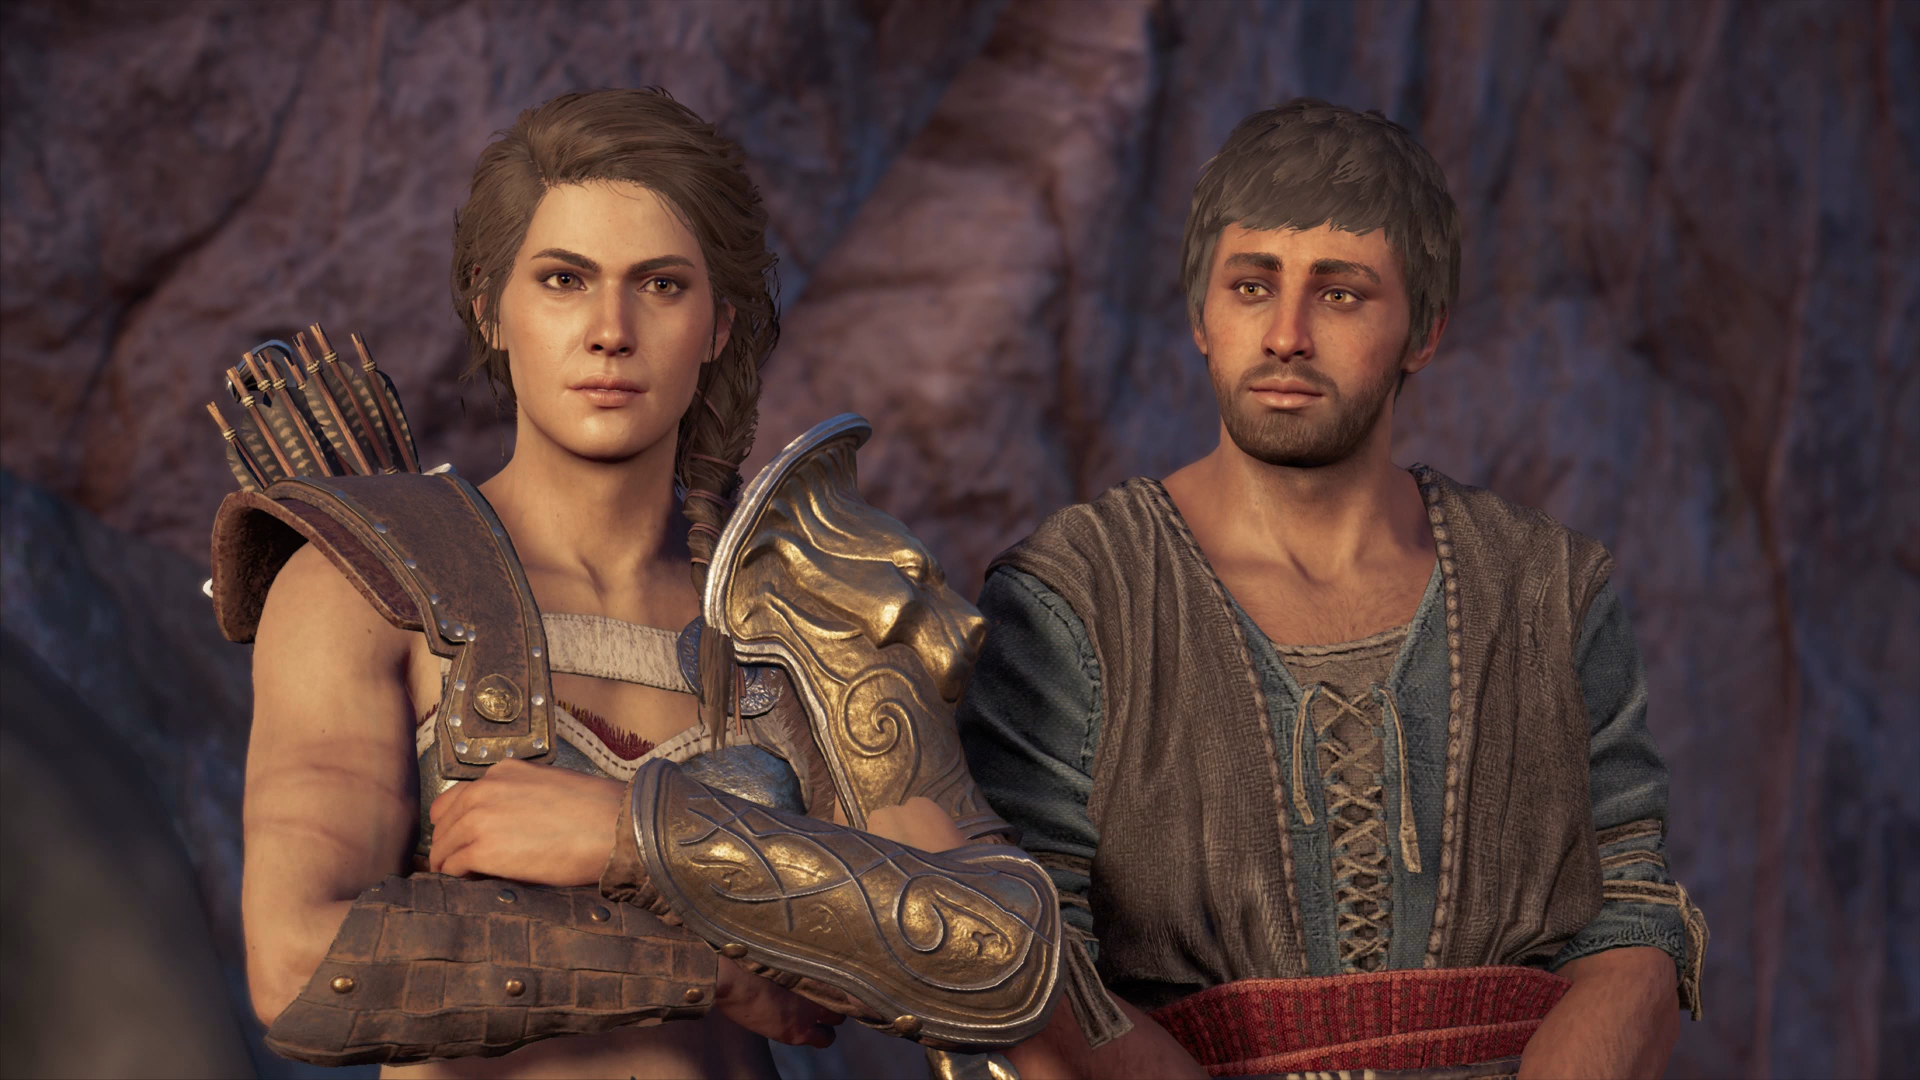 Assassin’s Creed Odyssey Director Says ‘We Missed The Mark’ With Controversial DLC Relationship [Update]